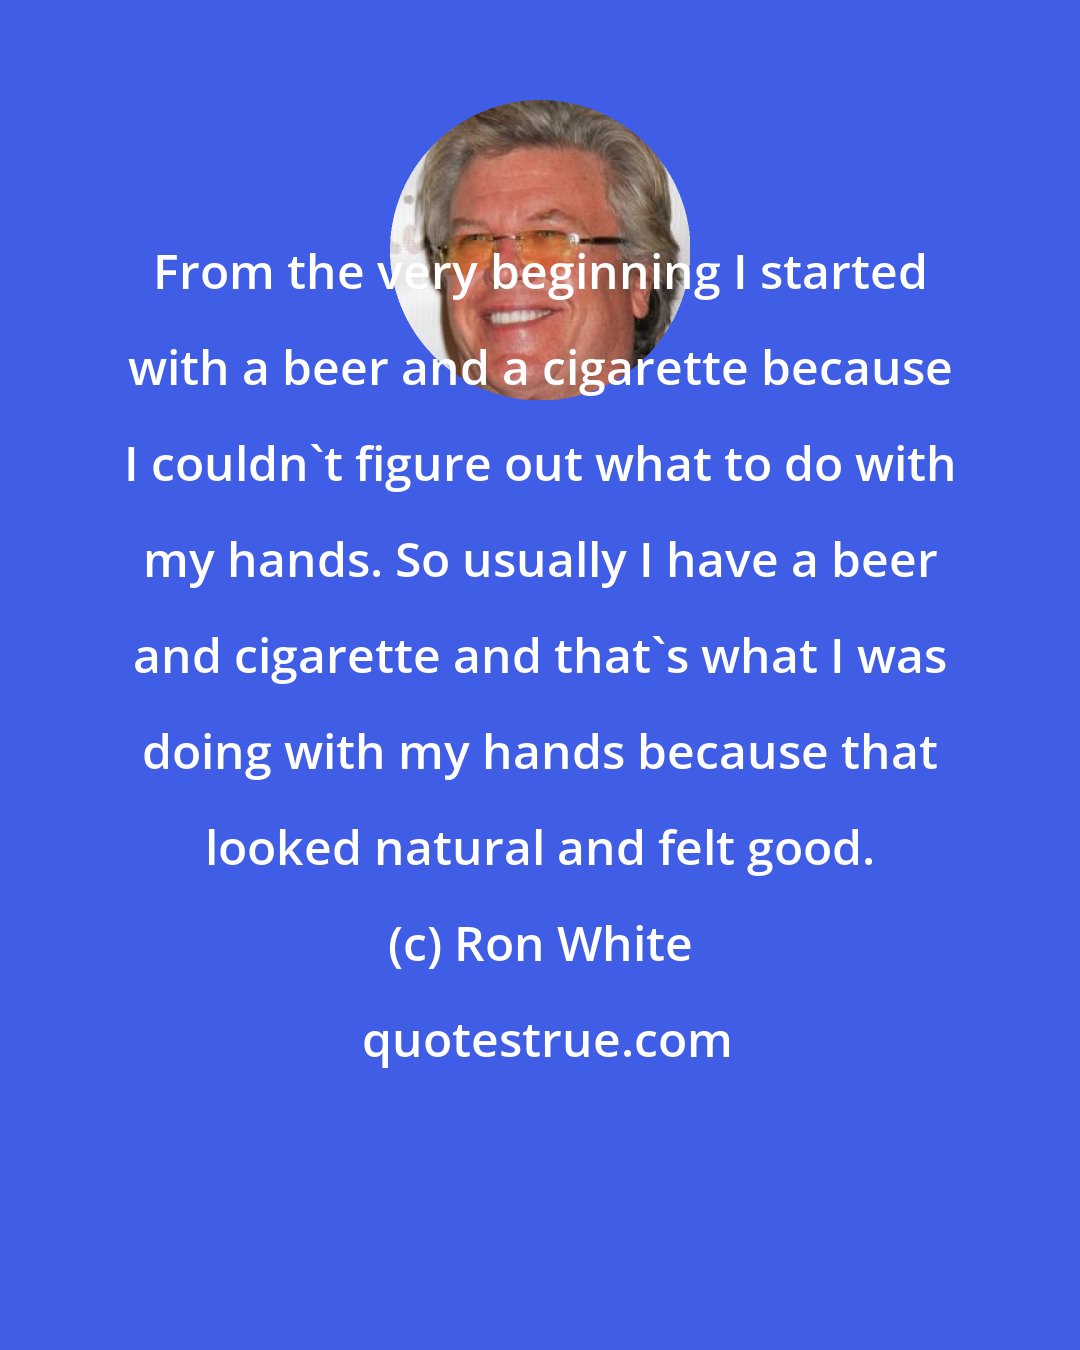 Ron White: From the very beginning I started with a beer and a cigarette because I couldn't figure out what to do with my hands. So usually I have a beer and cigarette and that's what I was doing with my hands because that looked natural and felt good.